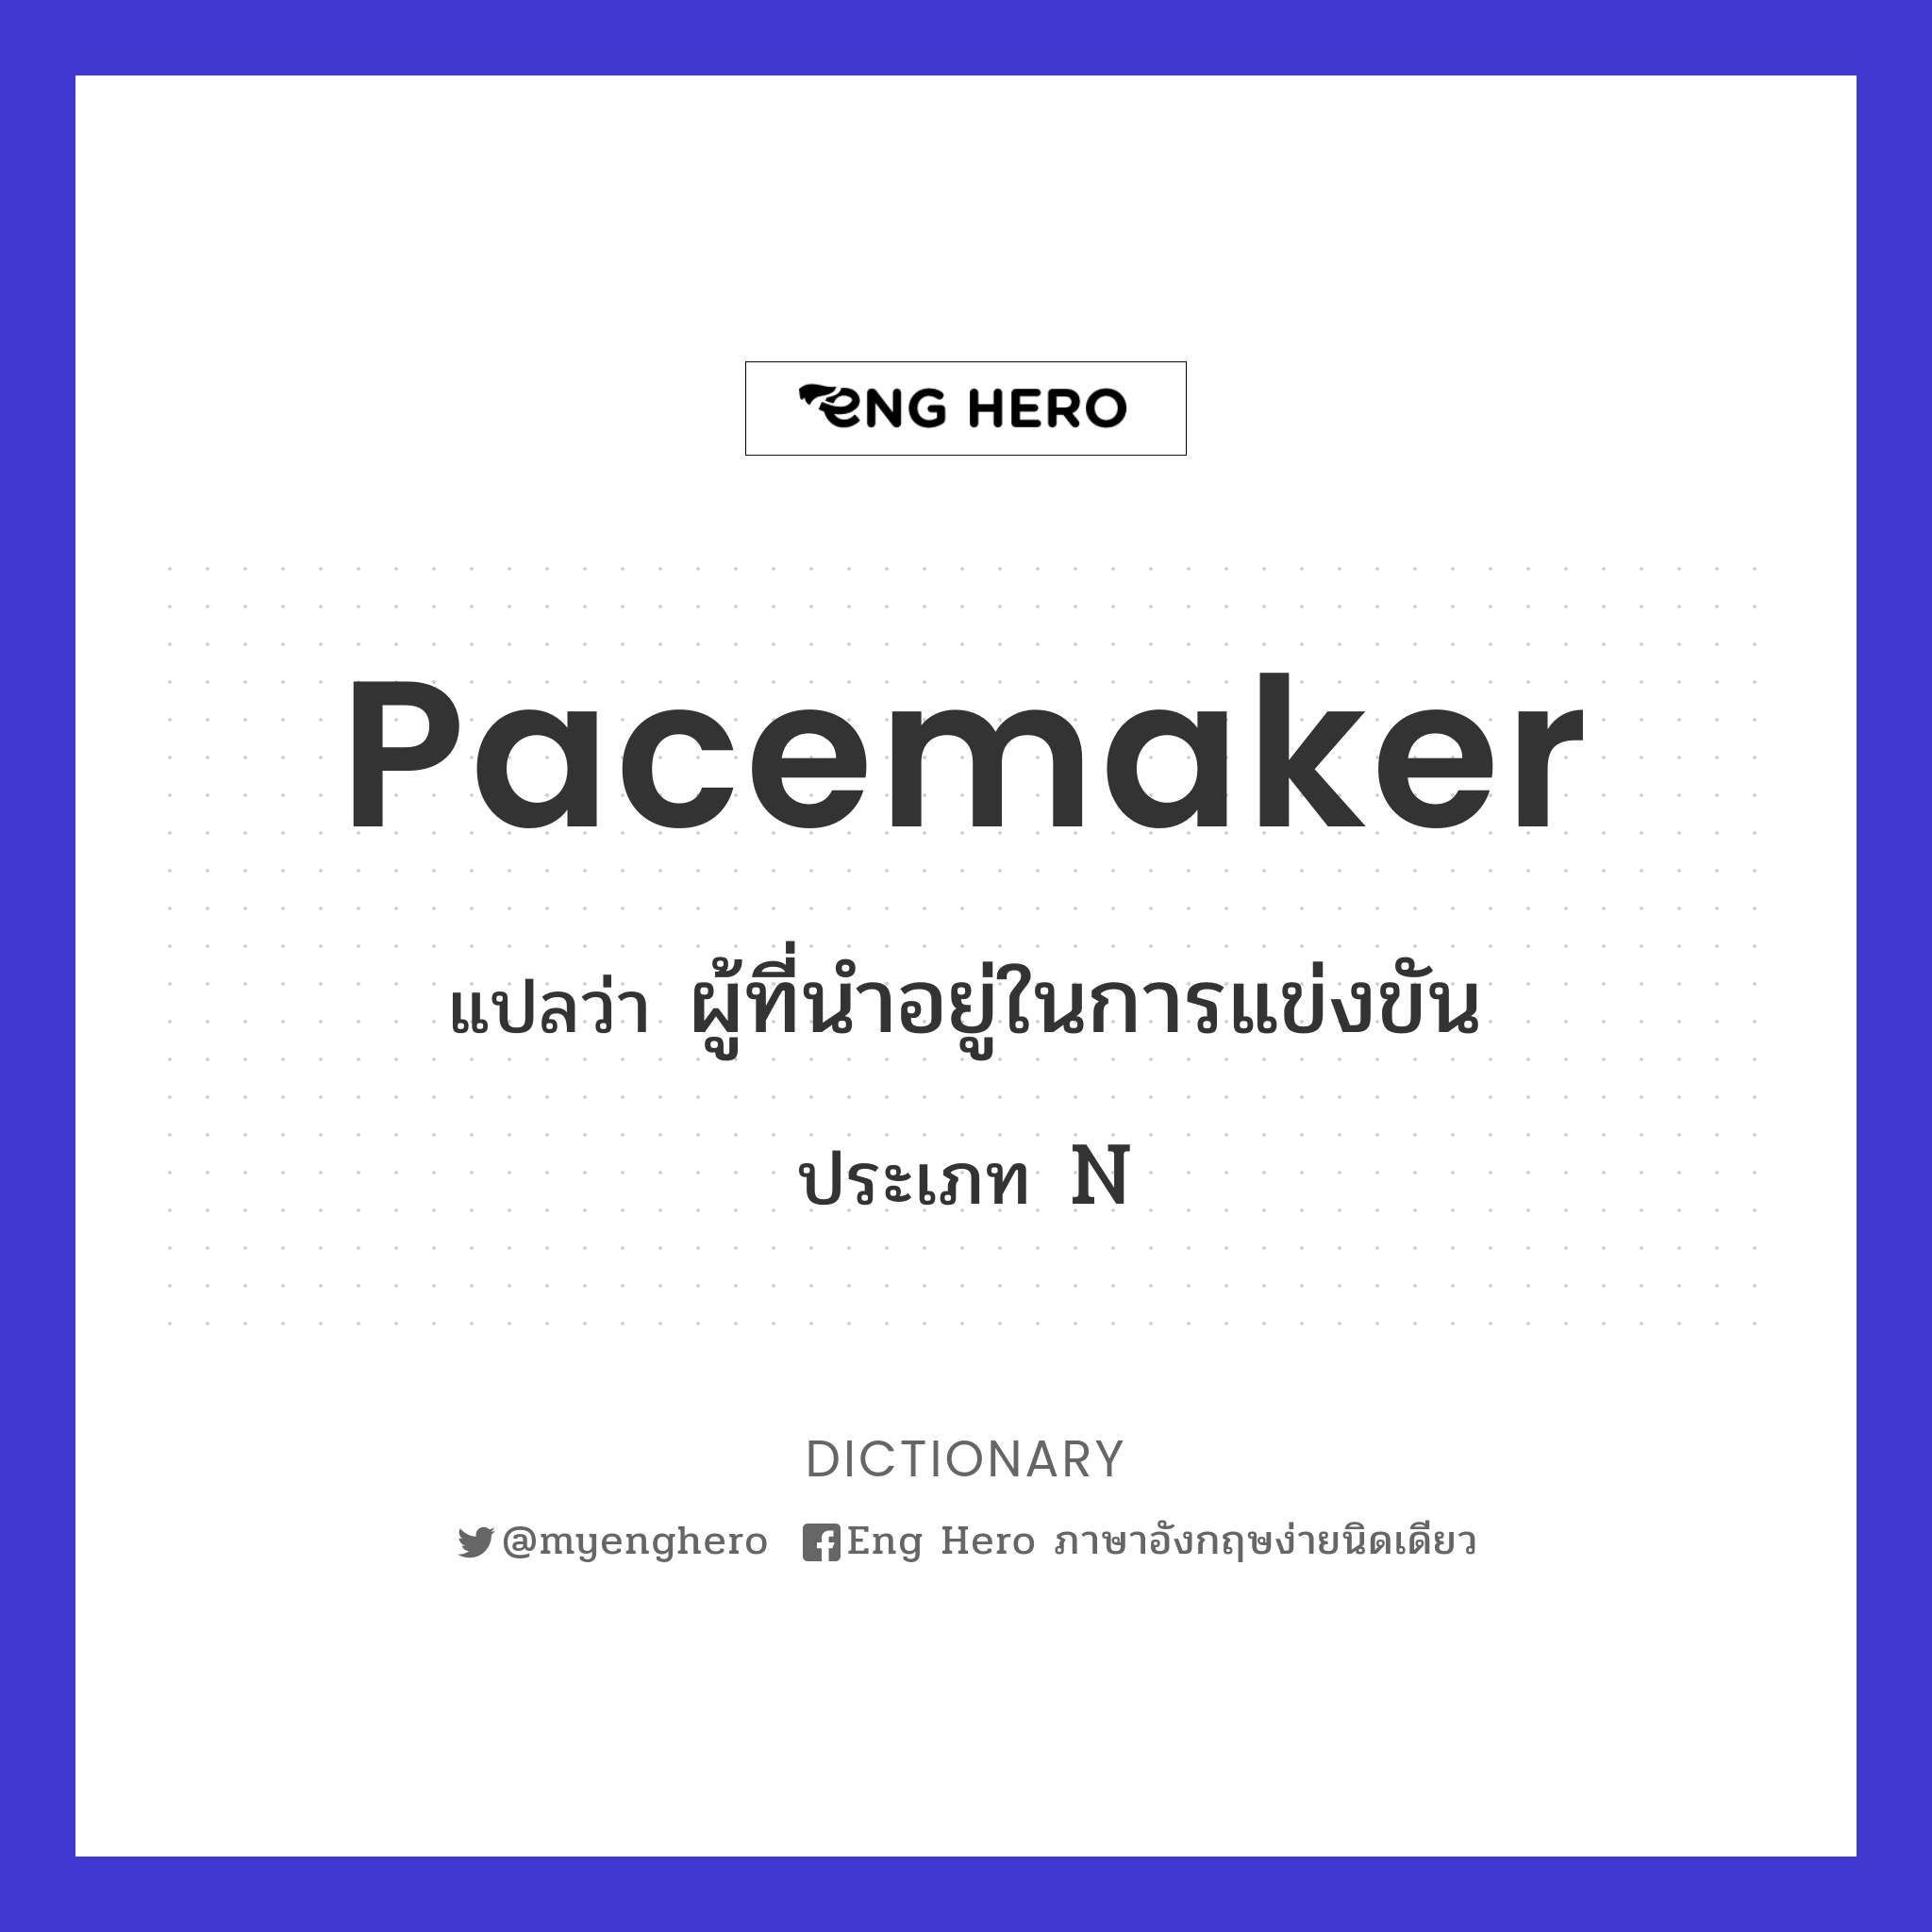 pacemaker